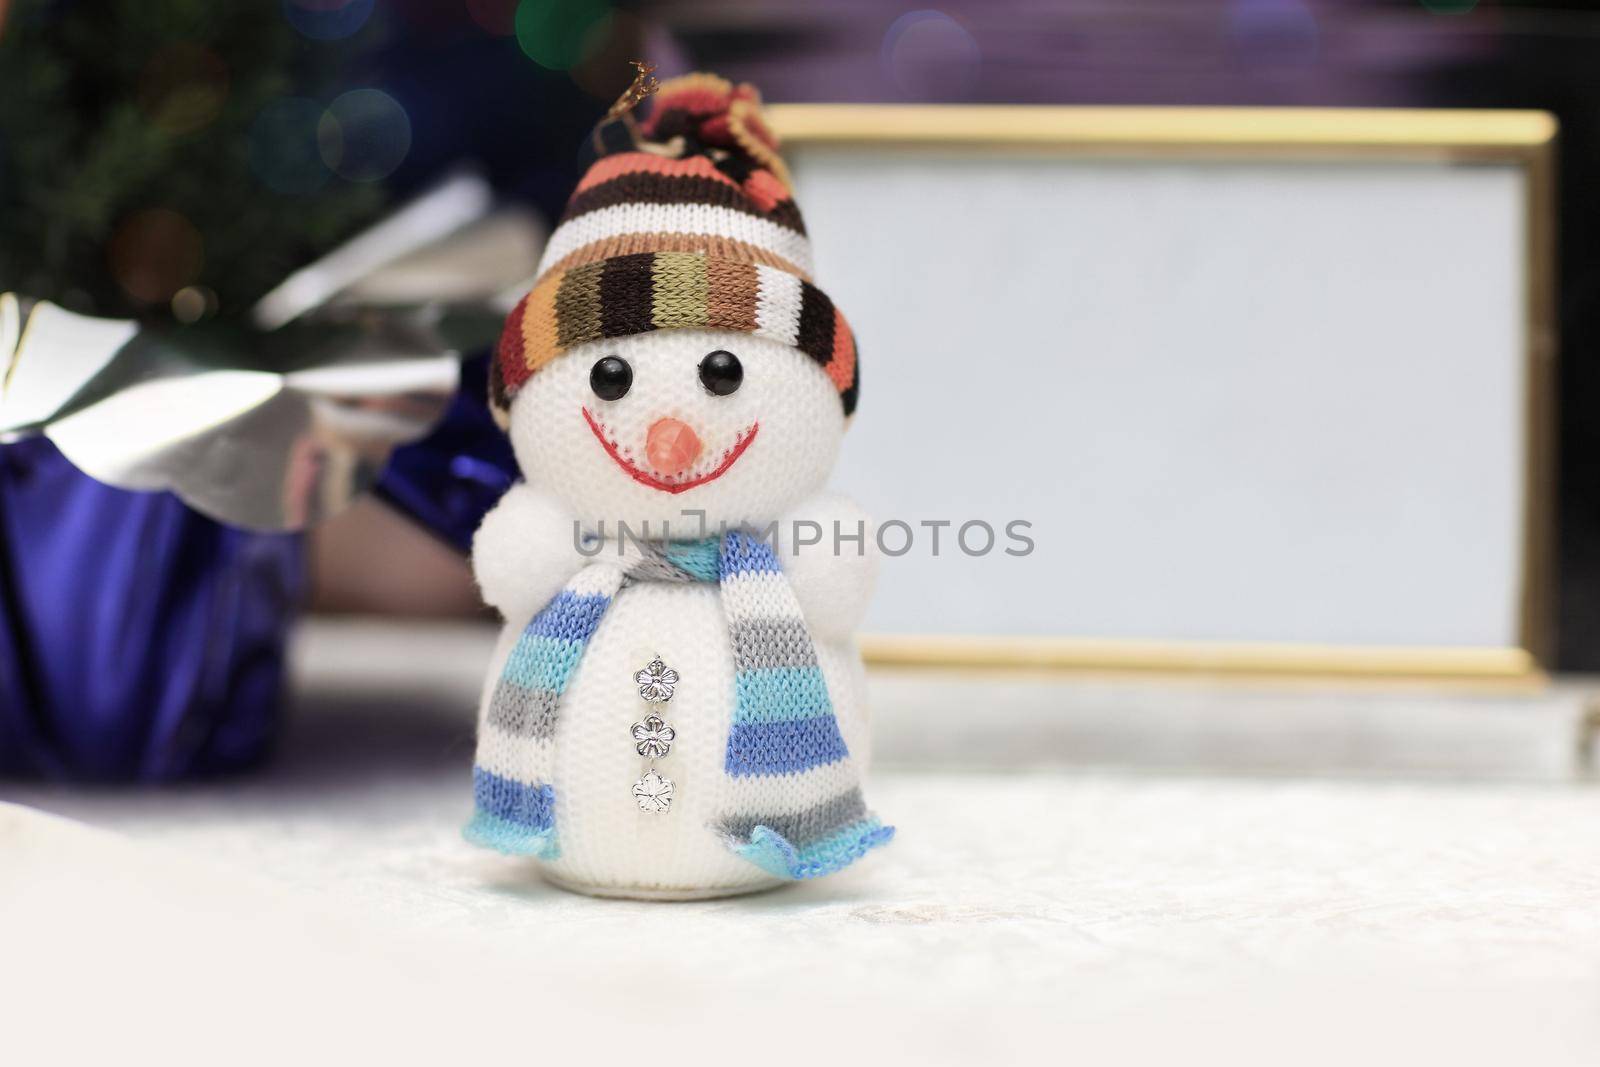 fun toy snowman in knit hat and scarf and blank Christmas backgr by SmartPhotoLab